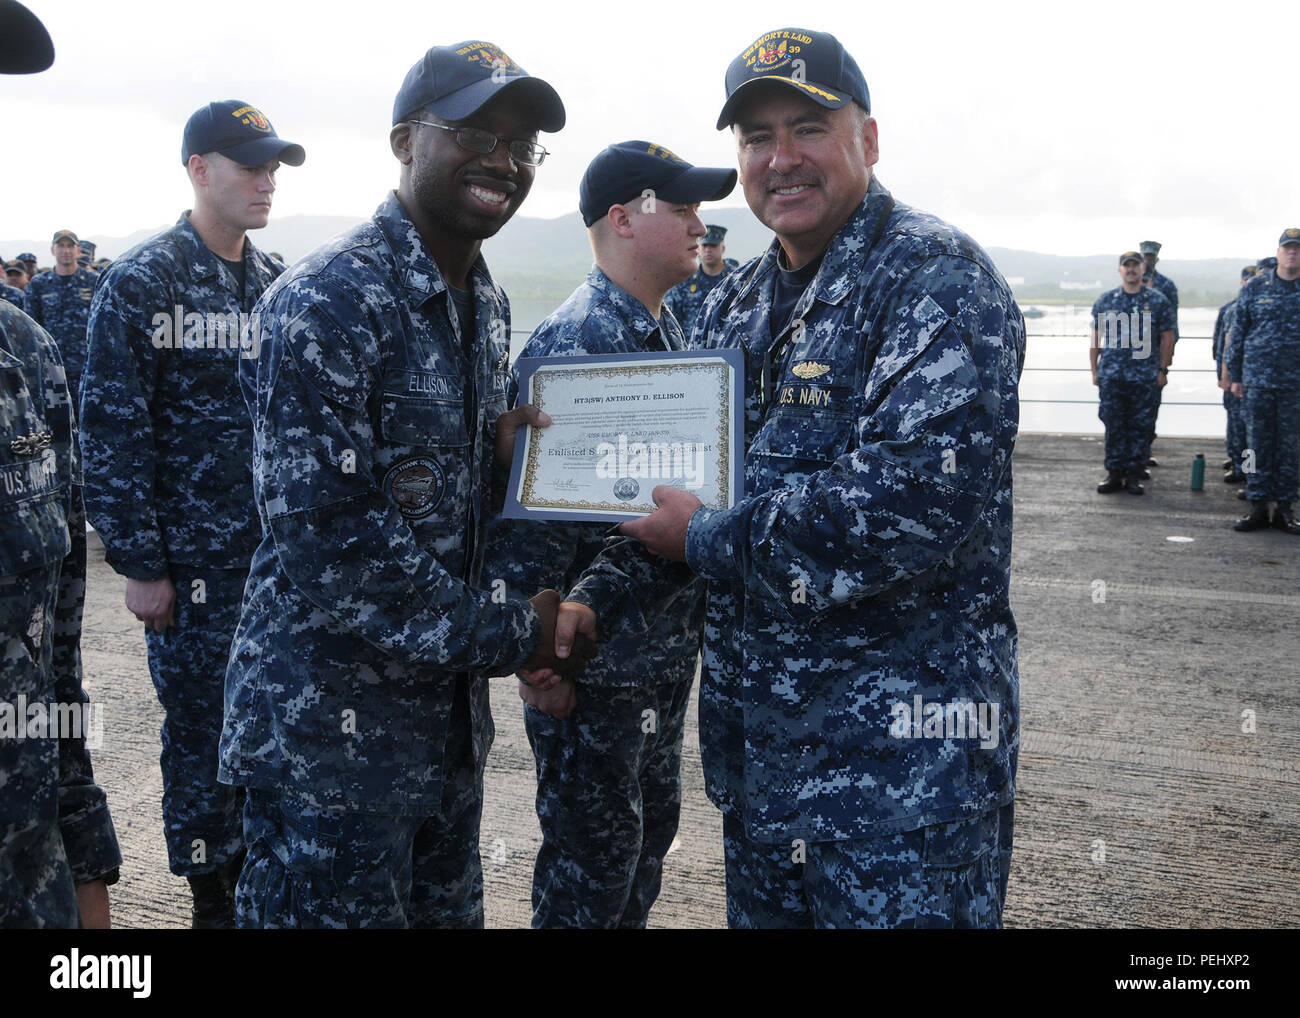 150828-N-VH871-002 U.S. NAVAL BASE GUAM (Aug. 28, 2015) – Capt. Mark A. Prokopius, commanding officer of submarine tender USS Emory S. Land (AS 39) presents Hull Technician 3rd Class Anthony Ellison with a certificate for completing his Enlisted Surface Warfare Specialist (ESWS) qualification. Sailors spend significant time working and studying to complete ESWS and upon completion have an extensive level of knowledge about shipboard departments, capabilities, damage control, force protection, supply, U.S. Navy heritage, and engineering.  Emory S. Land is a forward deployed expeditionary submar Stock Photo